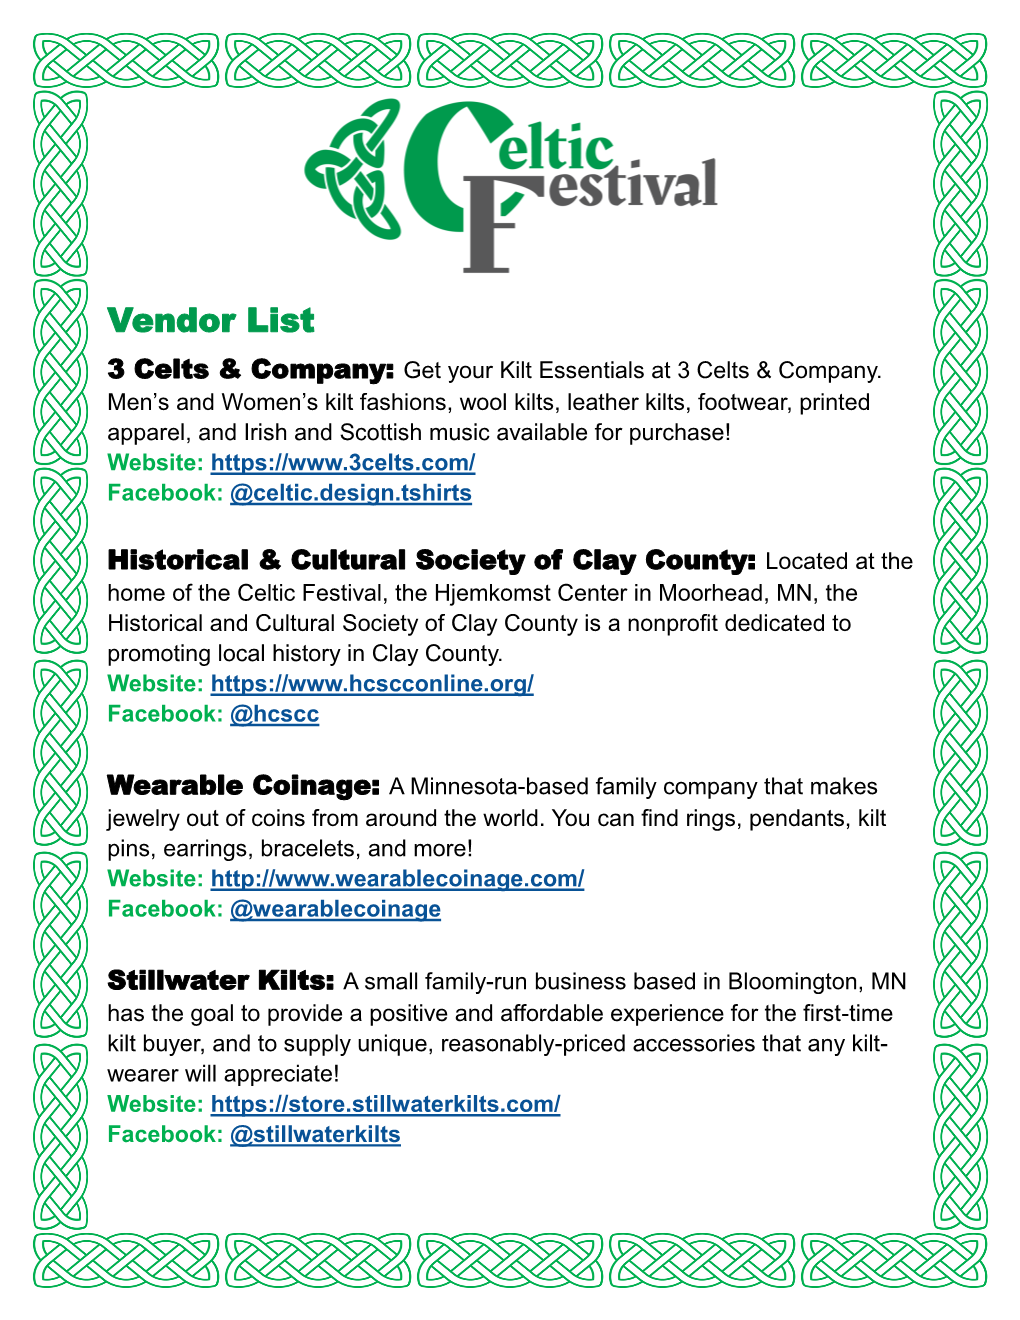 Check out This List of Celtic Festival Vendors